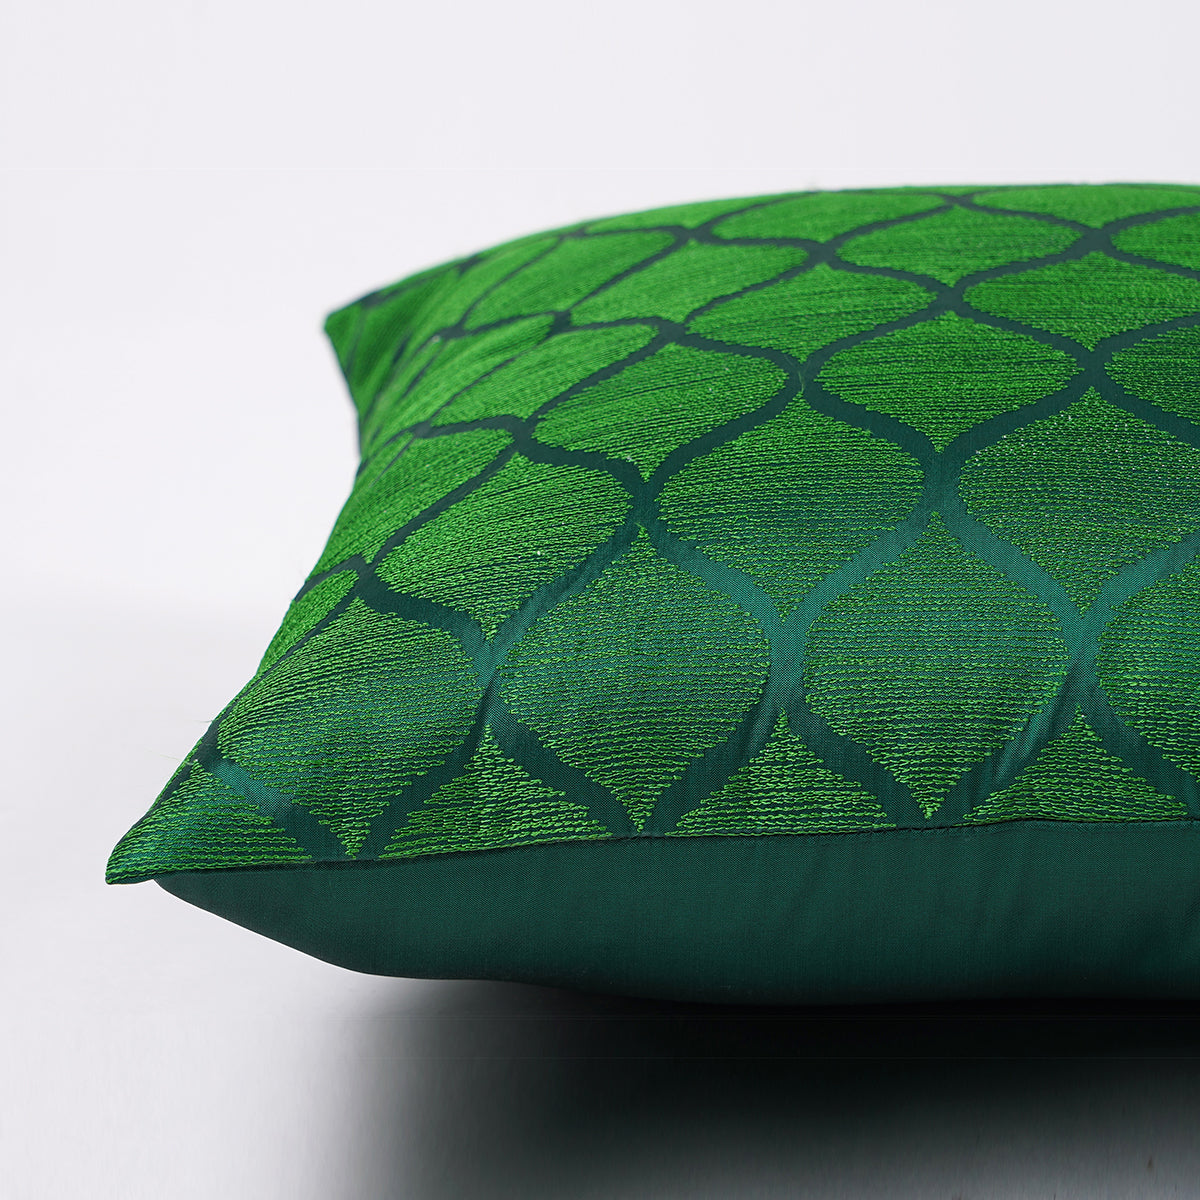 Shadow - Green ogee pattern embroidered pillow cover, Polytafetta pillow cover, sizes available